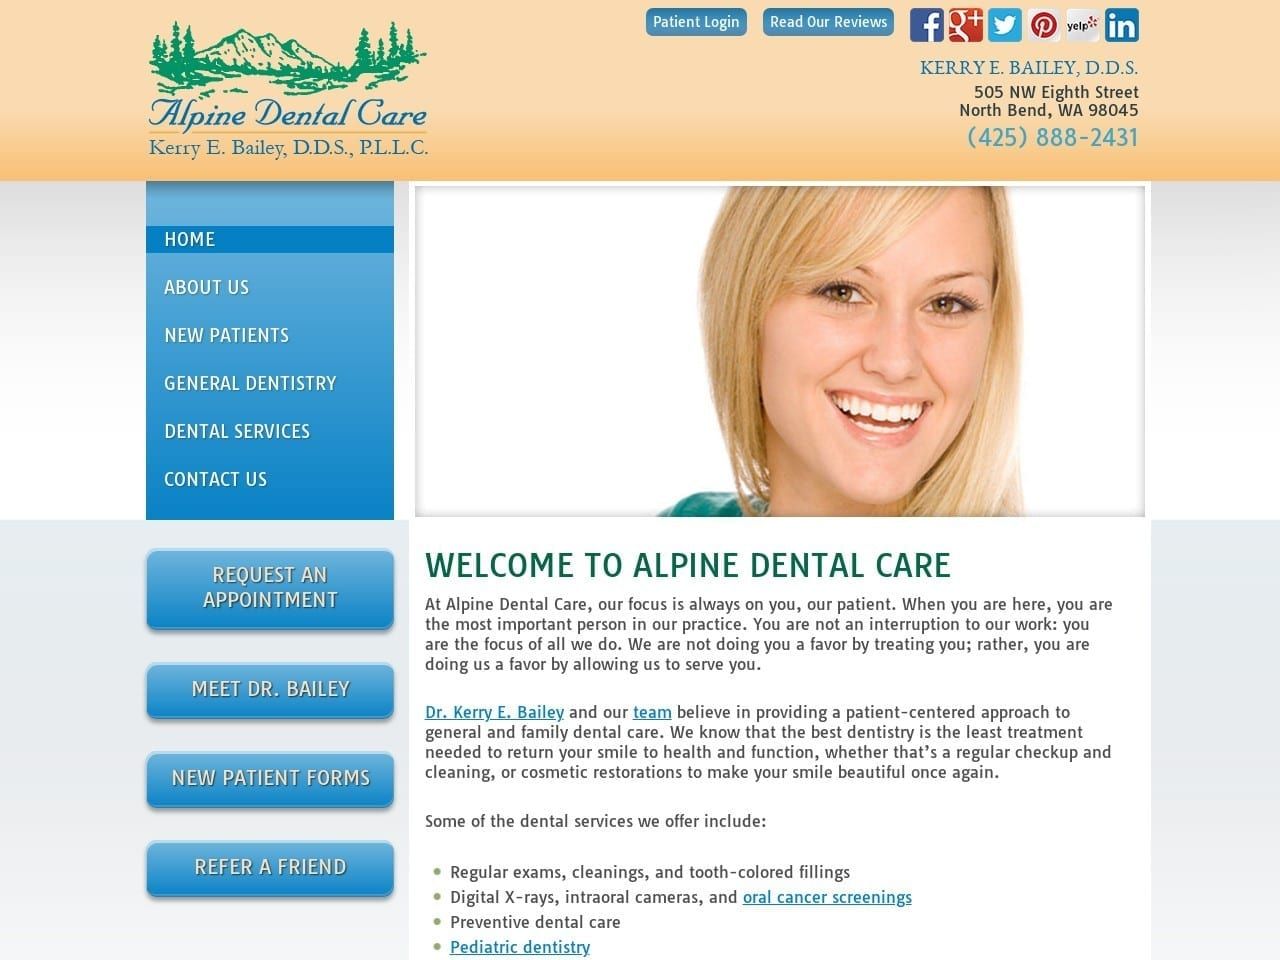 Alpine Dental Care The Office Of Kerry E. Bailey D Website Screenshot from alpinedentalnorthbend.com